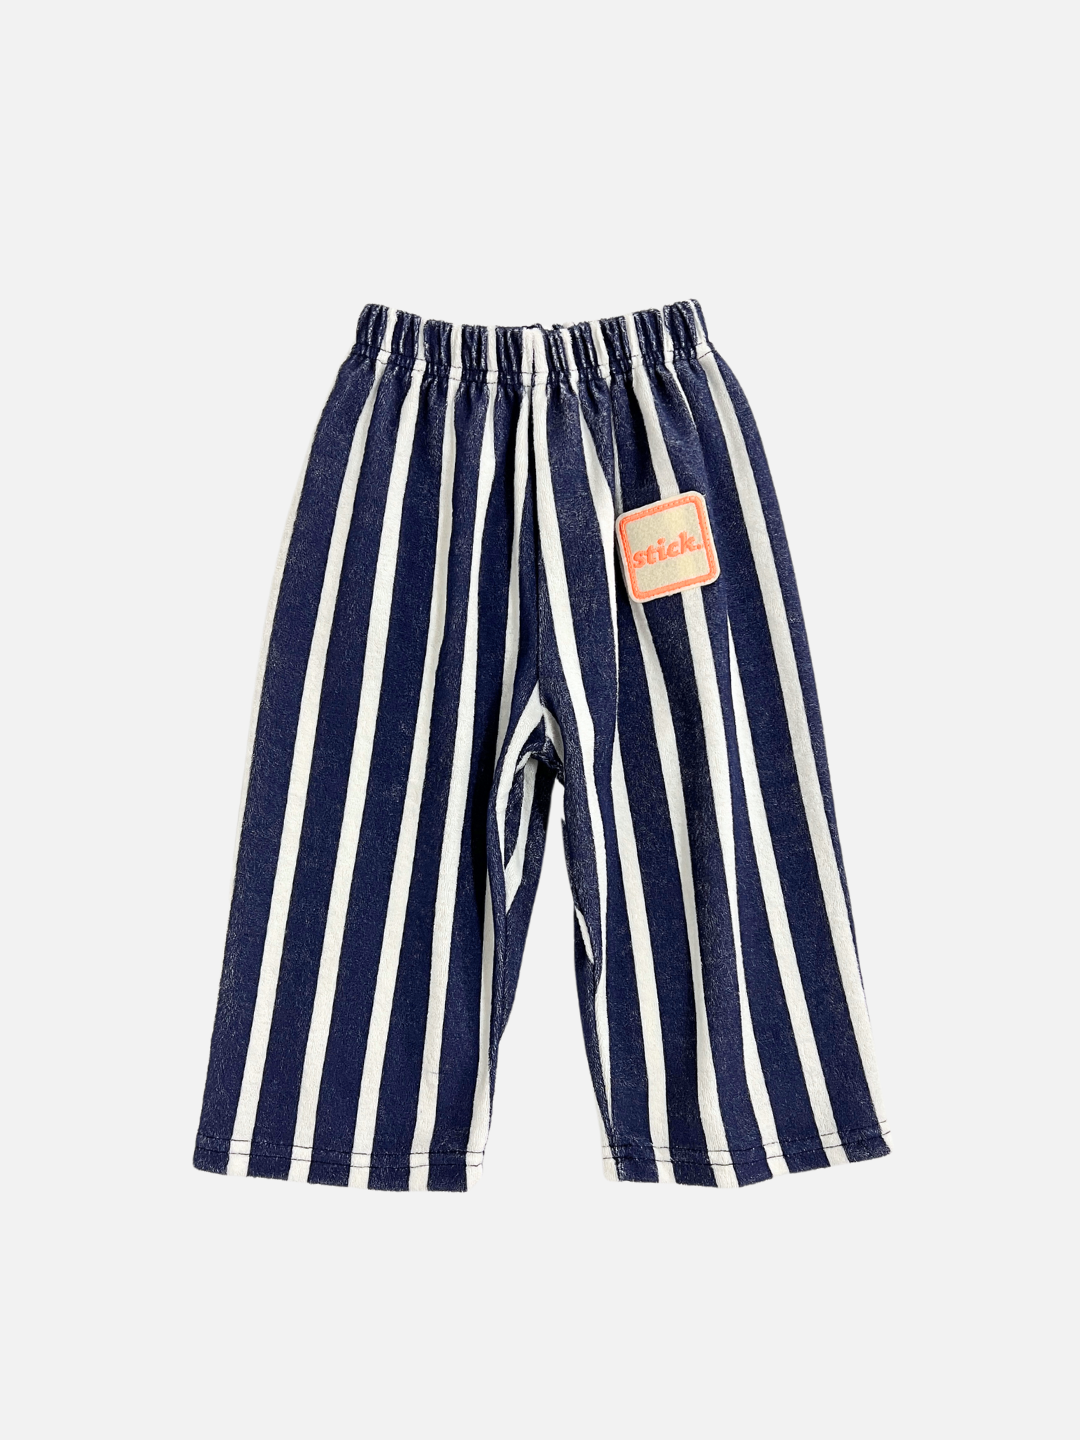 Front view of the Paint Roller Pants in Terry fabric white/navy stripes. "Stick" patch logo on the left leg in cream and orange. 